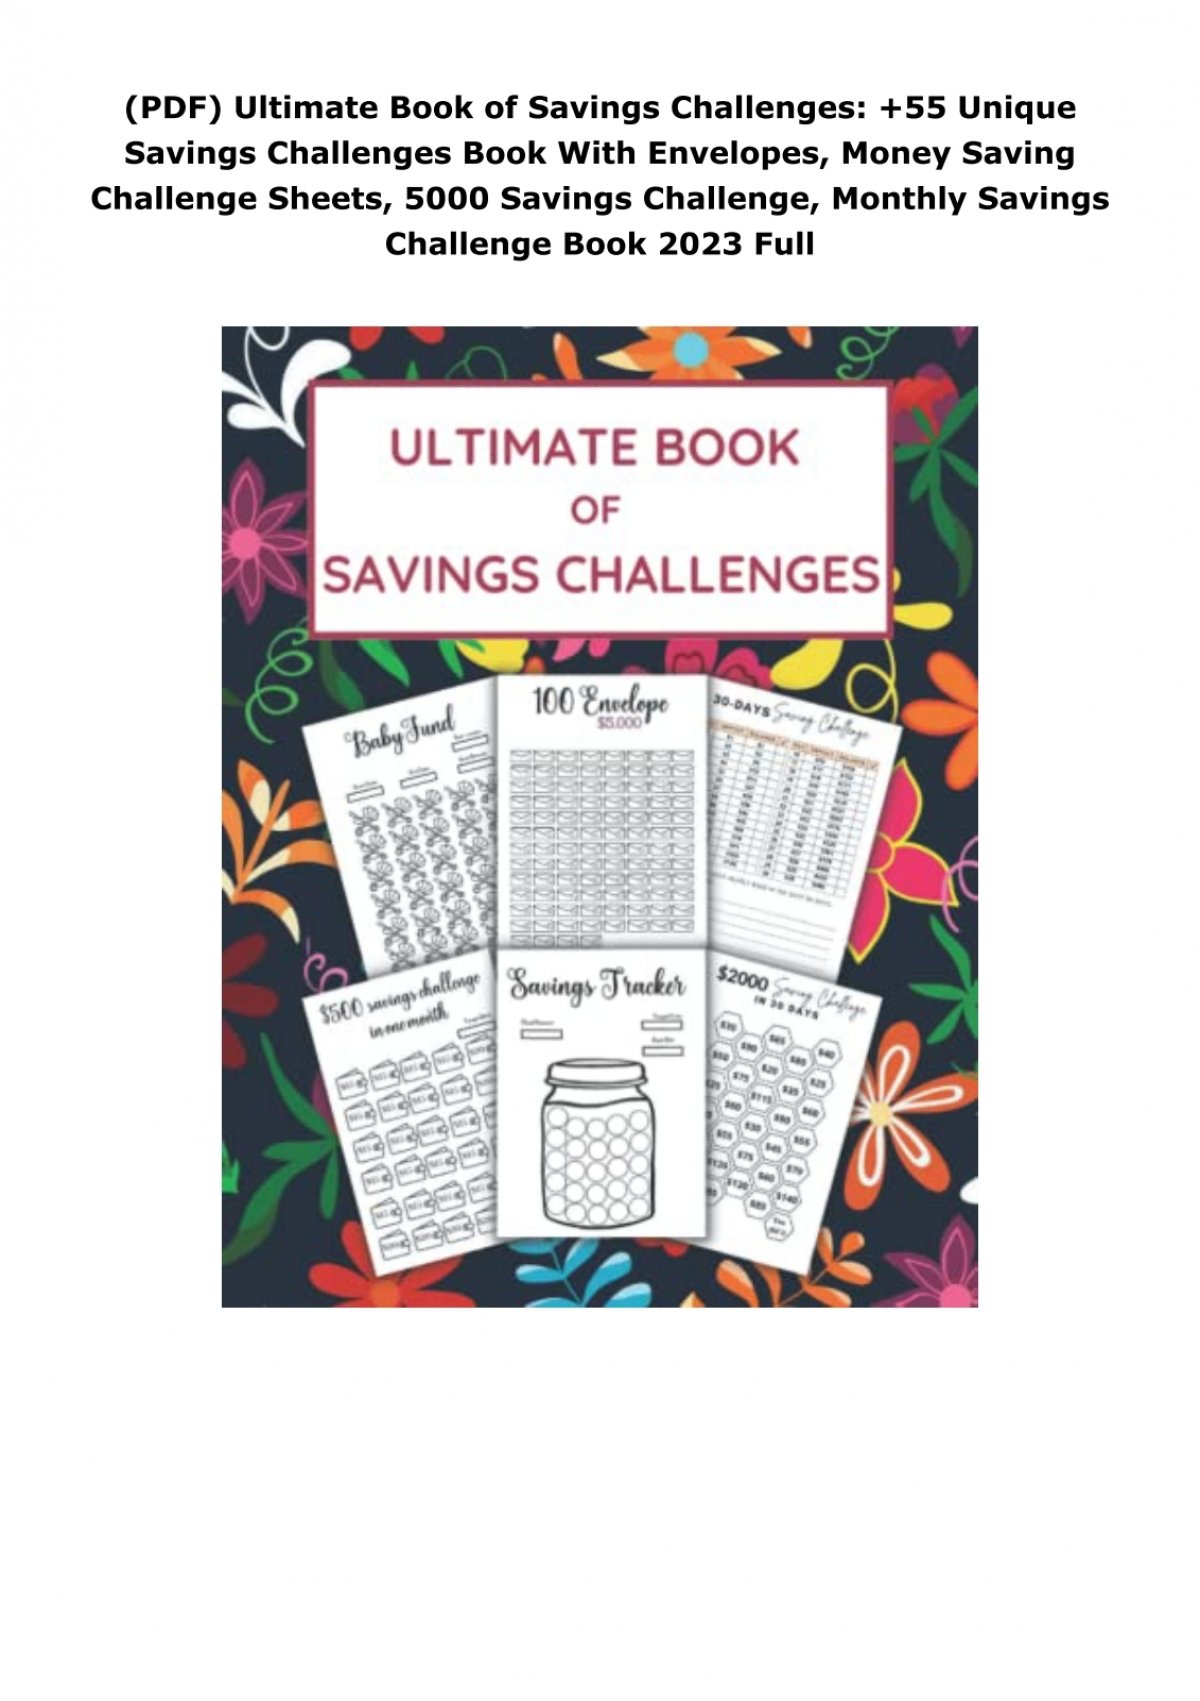 pdf-ultimate-book-of-savings-challenges-55-unique-savings